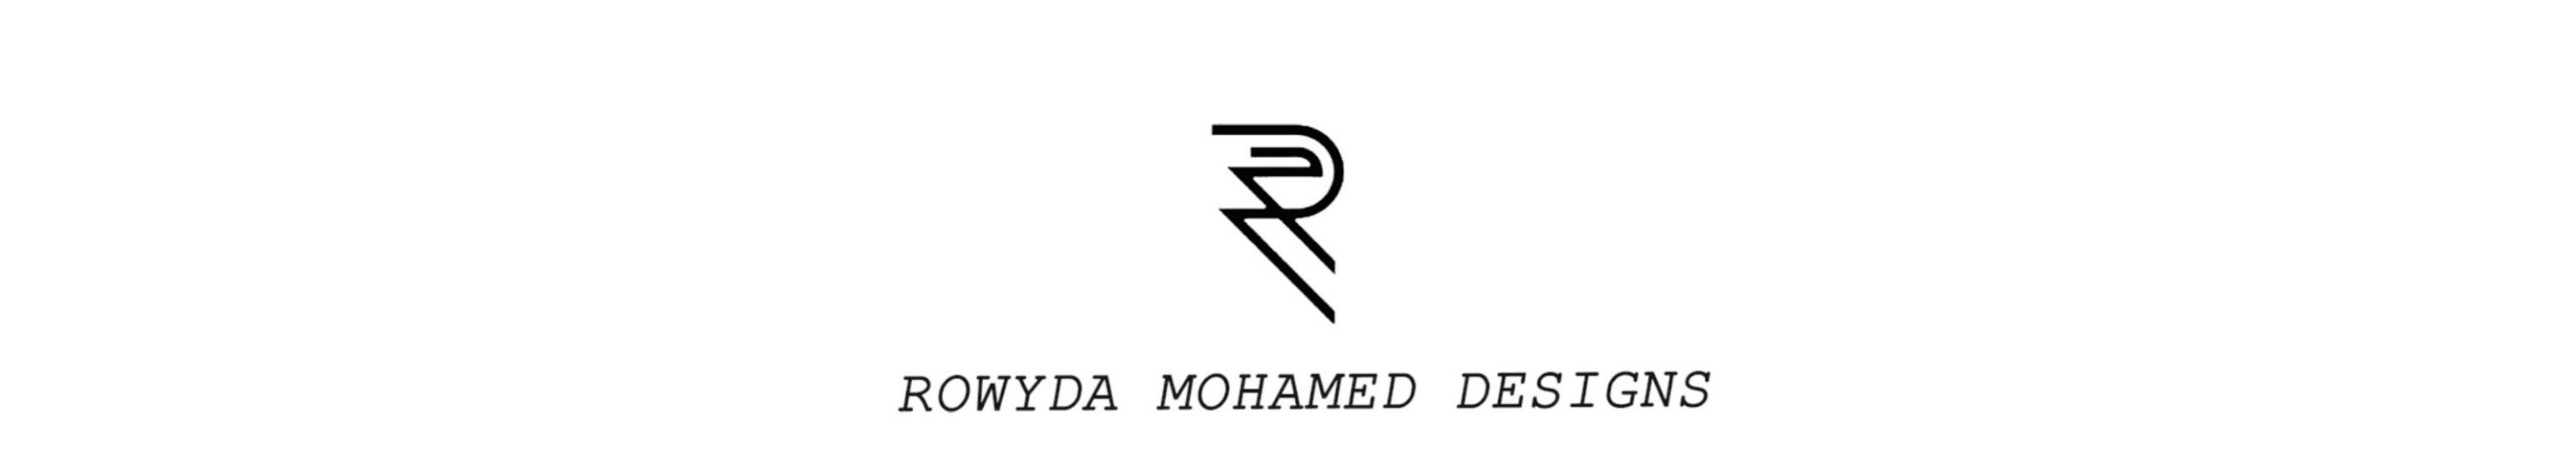 Rowyda Mohamed's profile banner